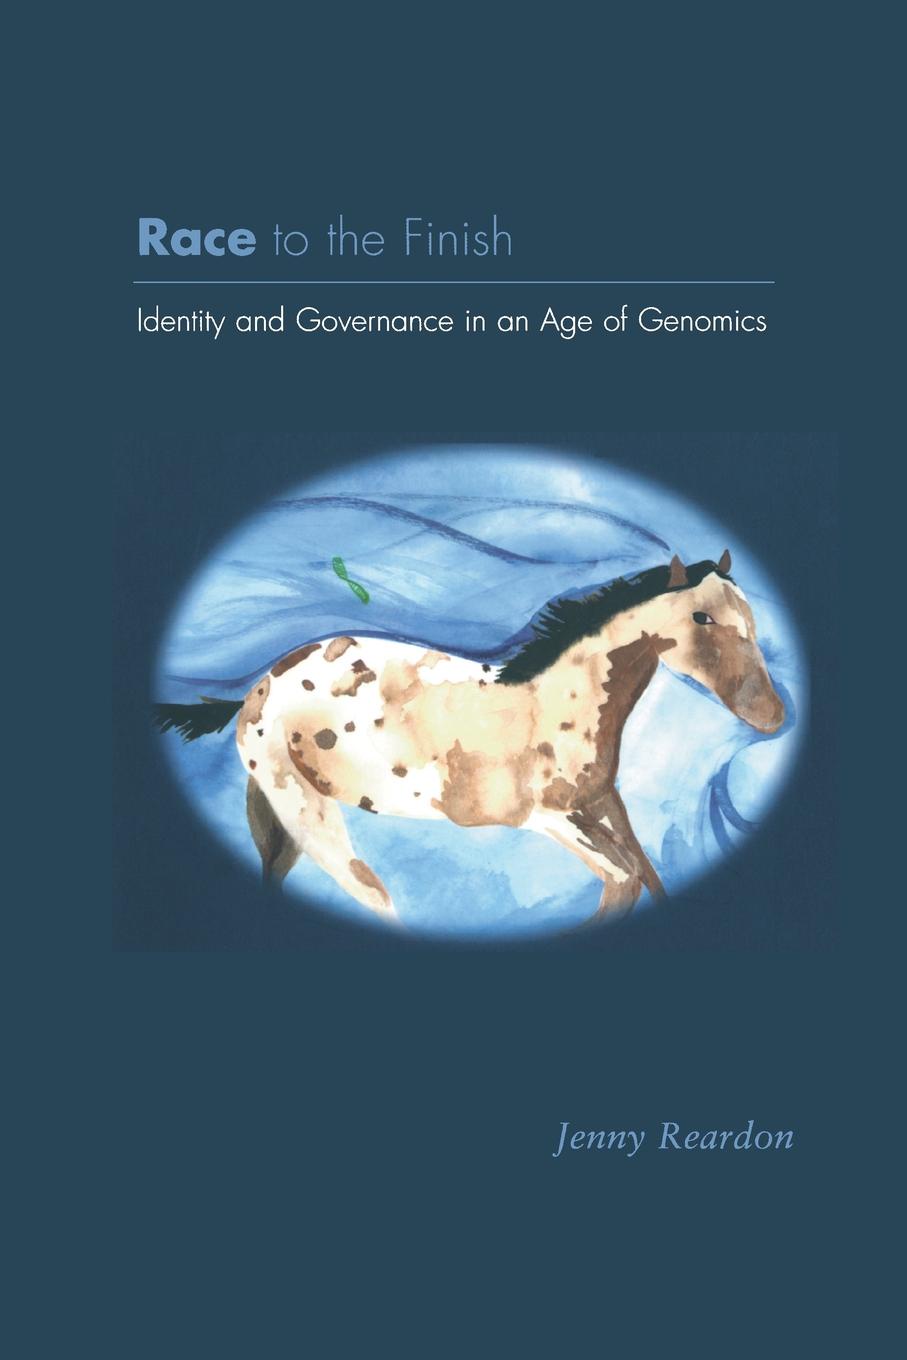 Race to the Finish. Identity and Governance in an Age of Genomics